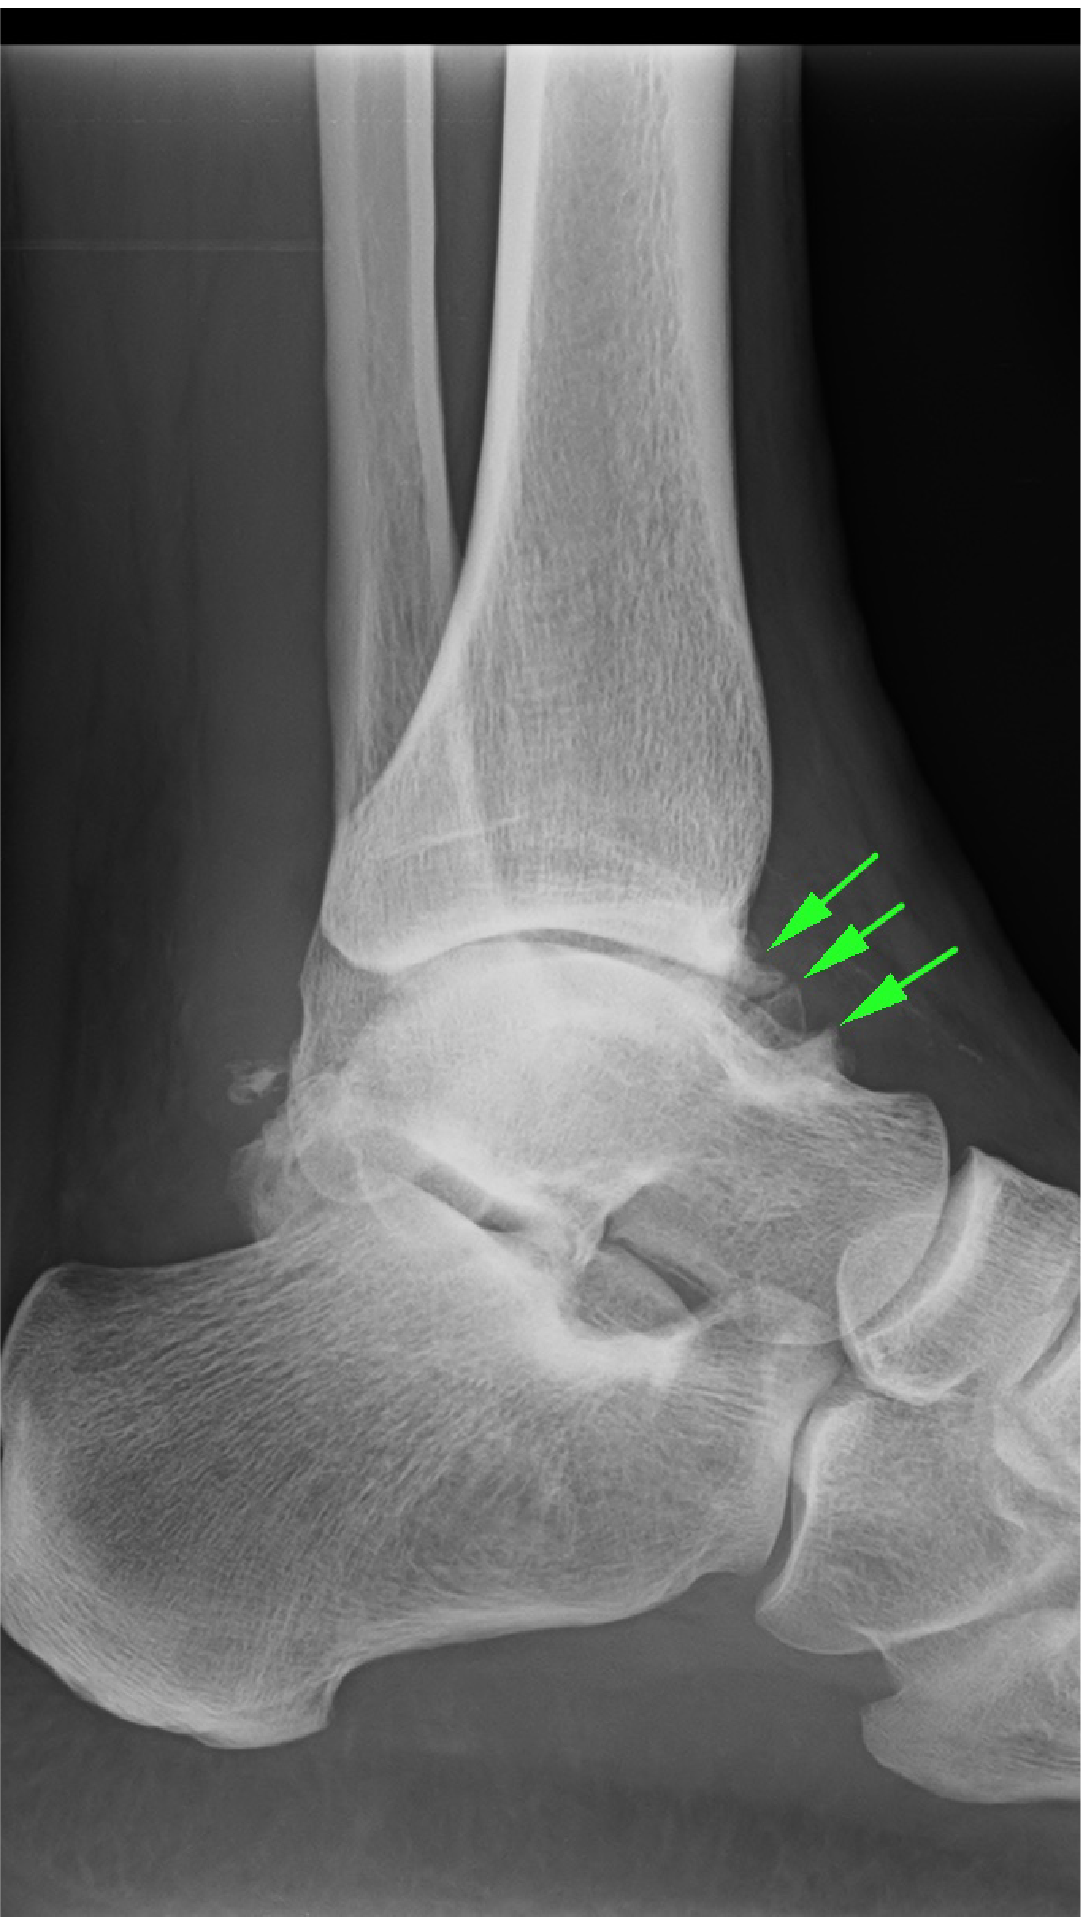 Chronic Ankle Instability Faqs Foot And Ankle Doctor Articles